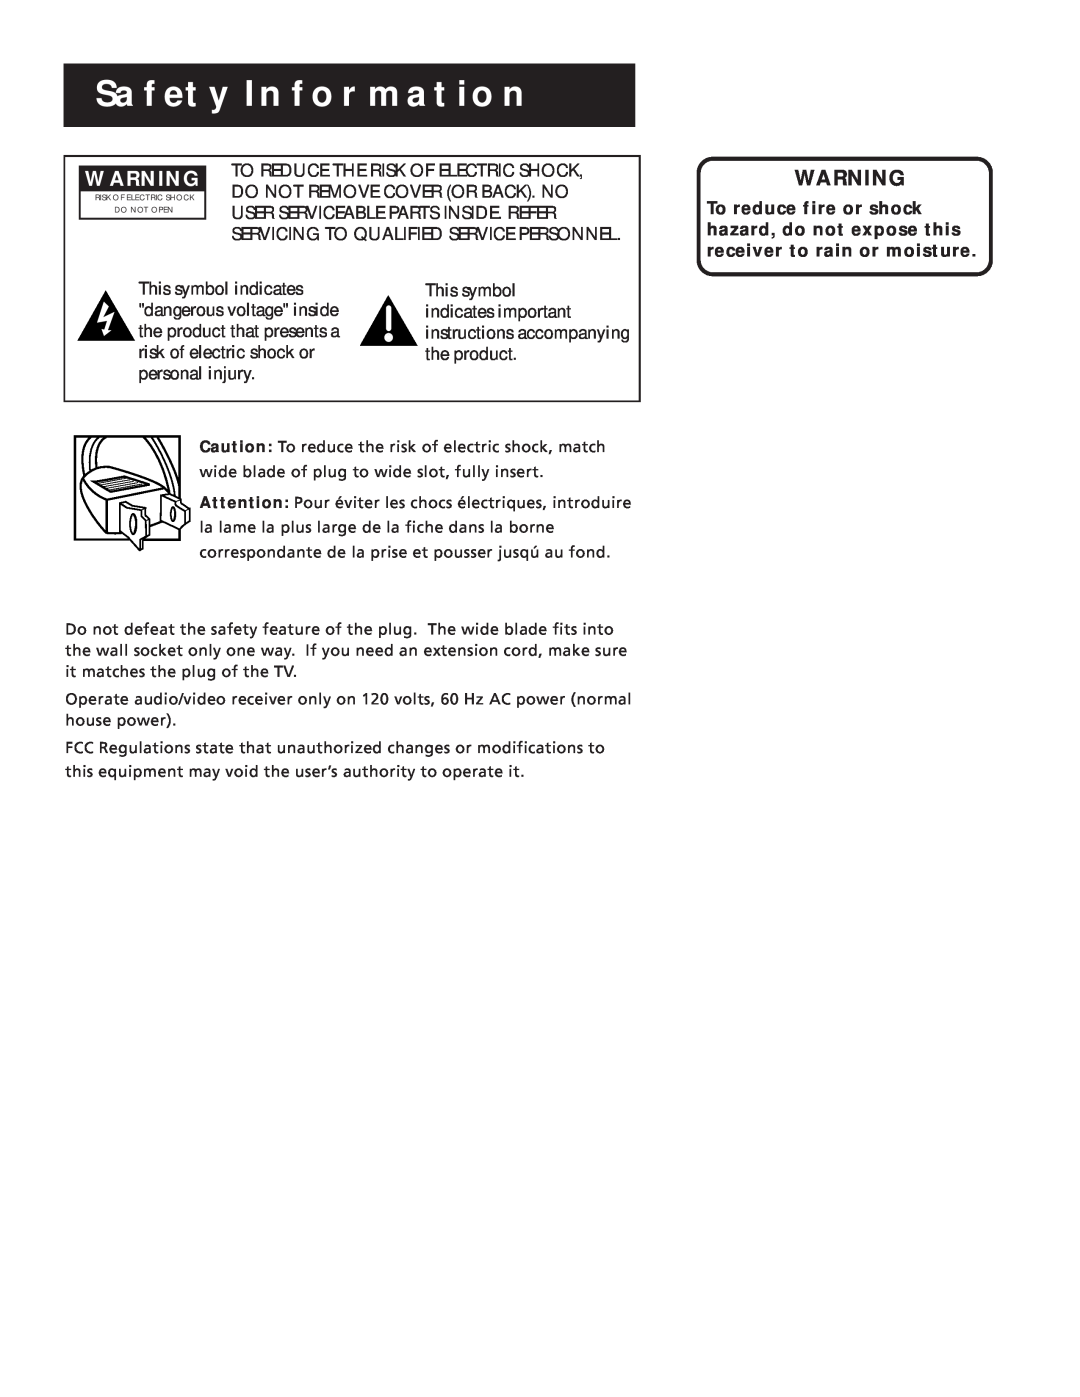 RCA RV3693 manual Safety Information, Risk Of Electric Shock Do Not Open 